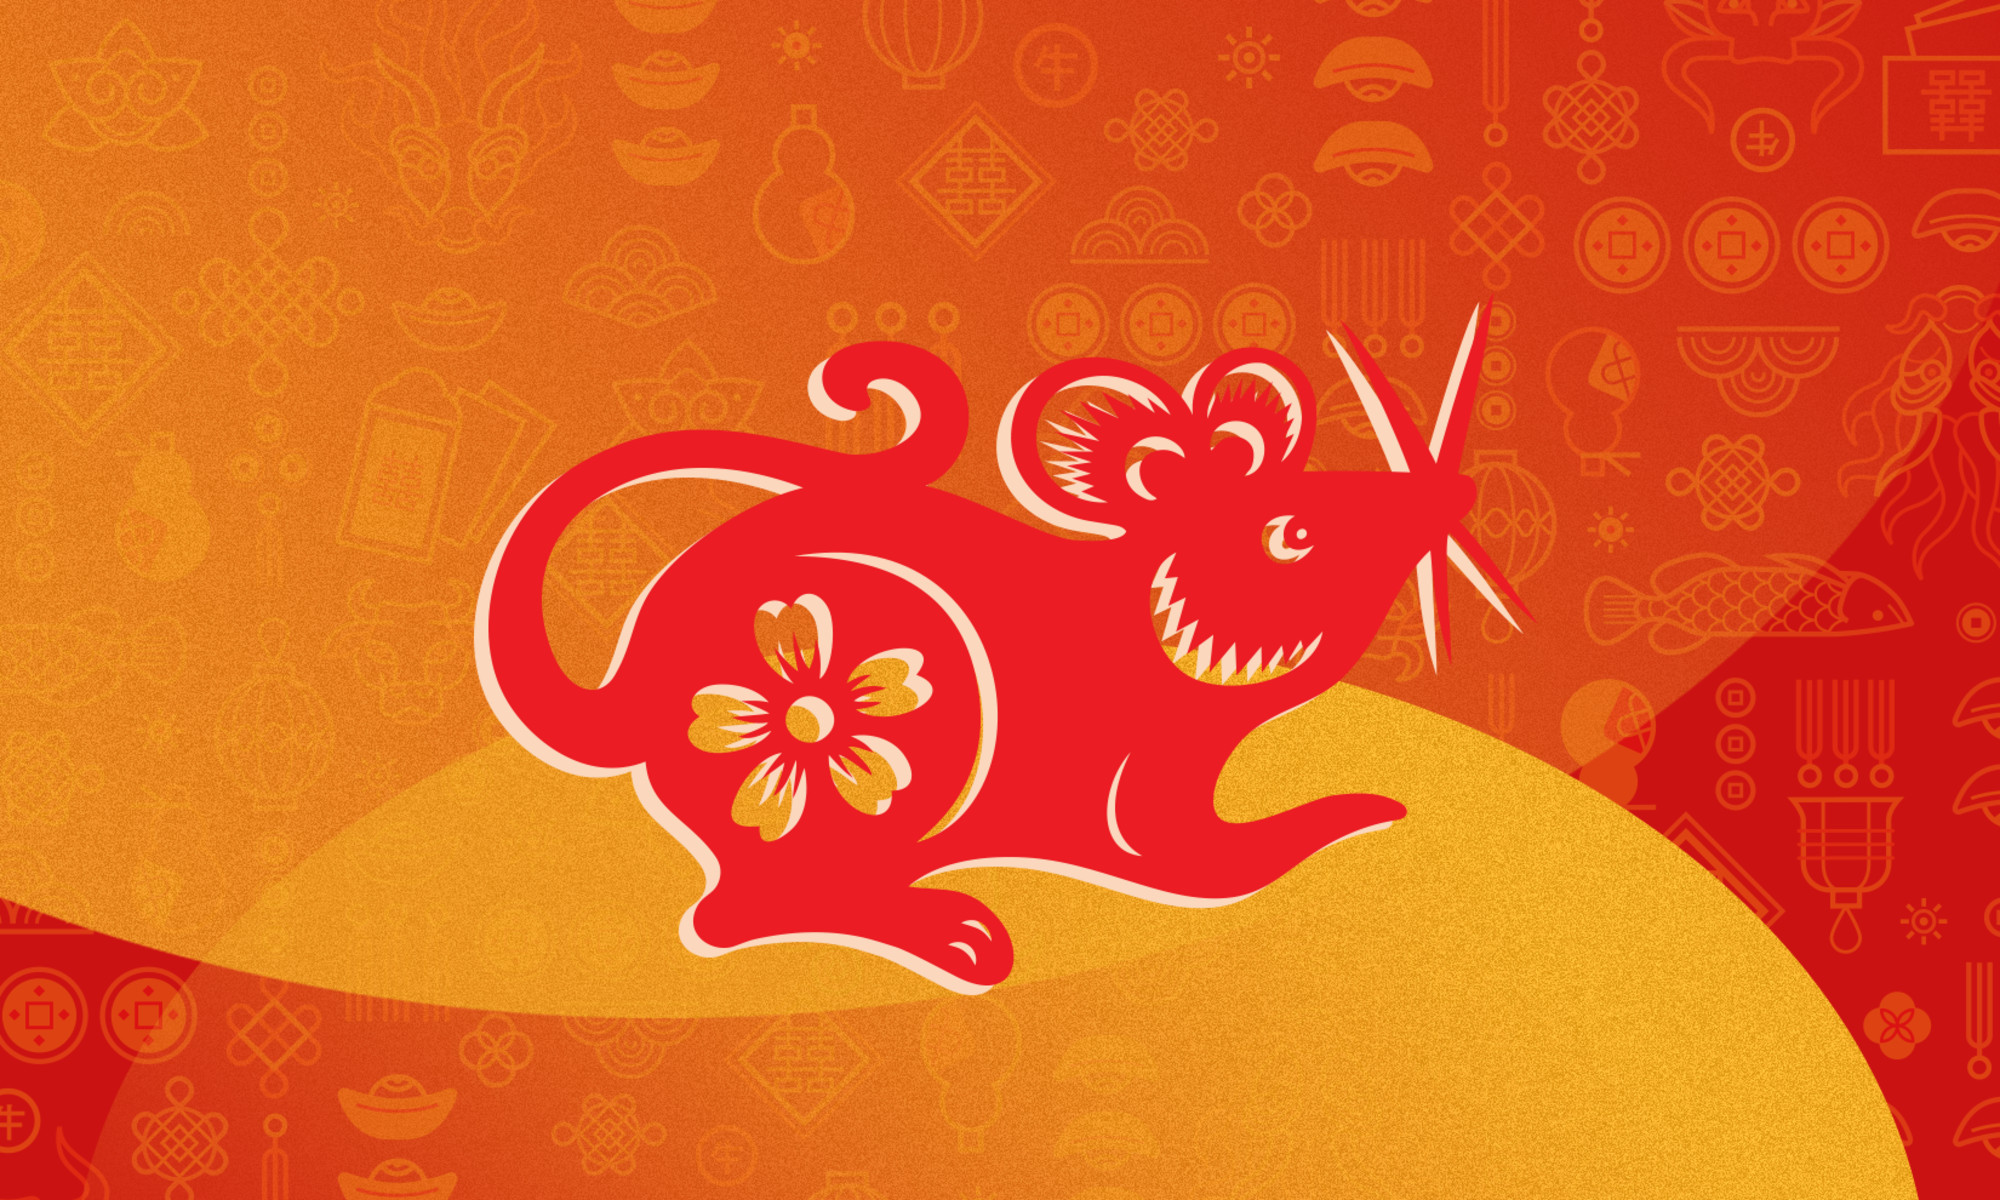 Rats Are Lucky During The Year Of The Ox In Chinese Astrology — Here's Why